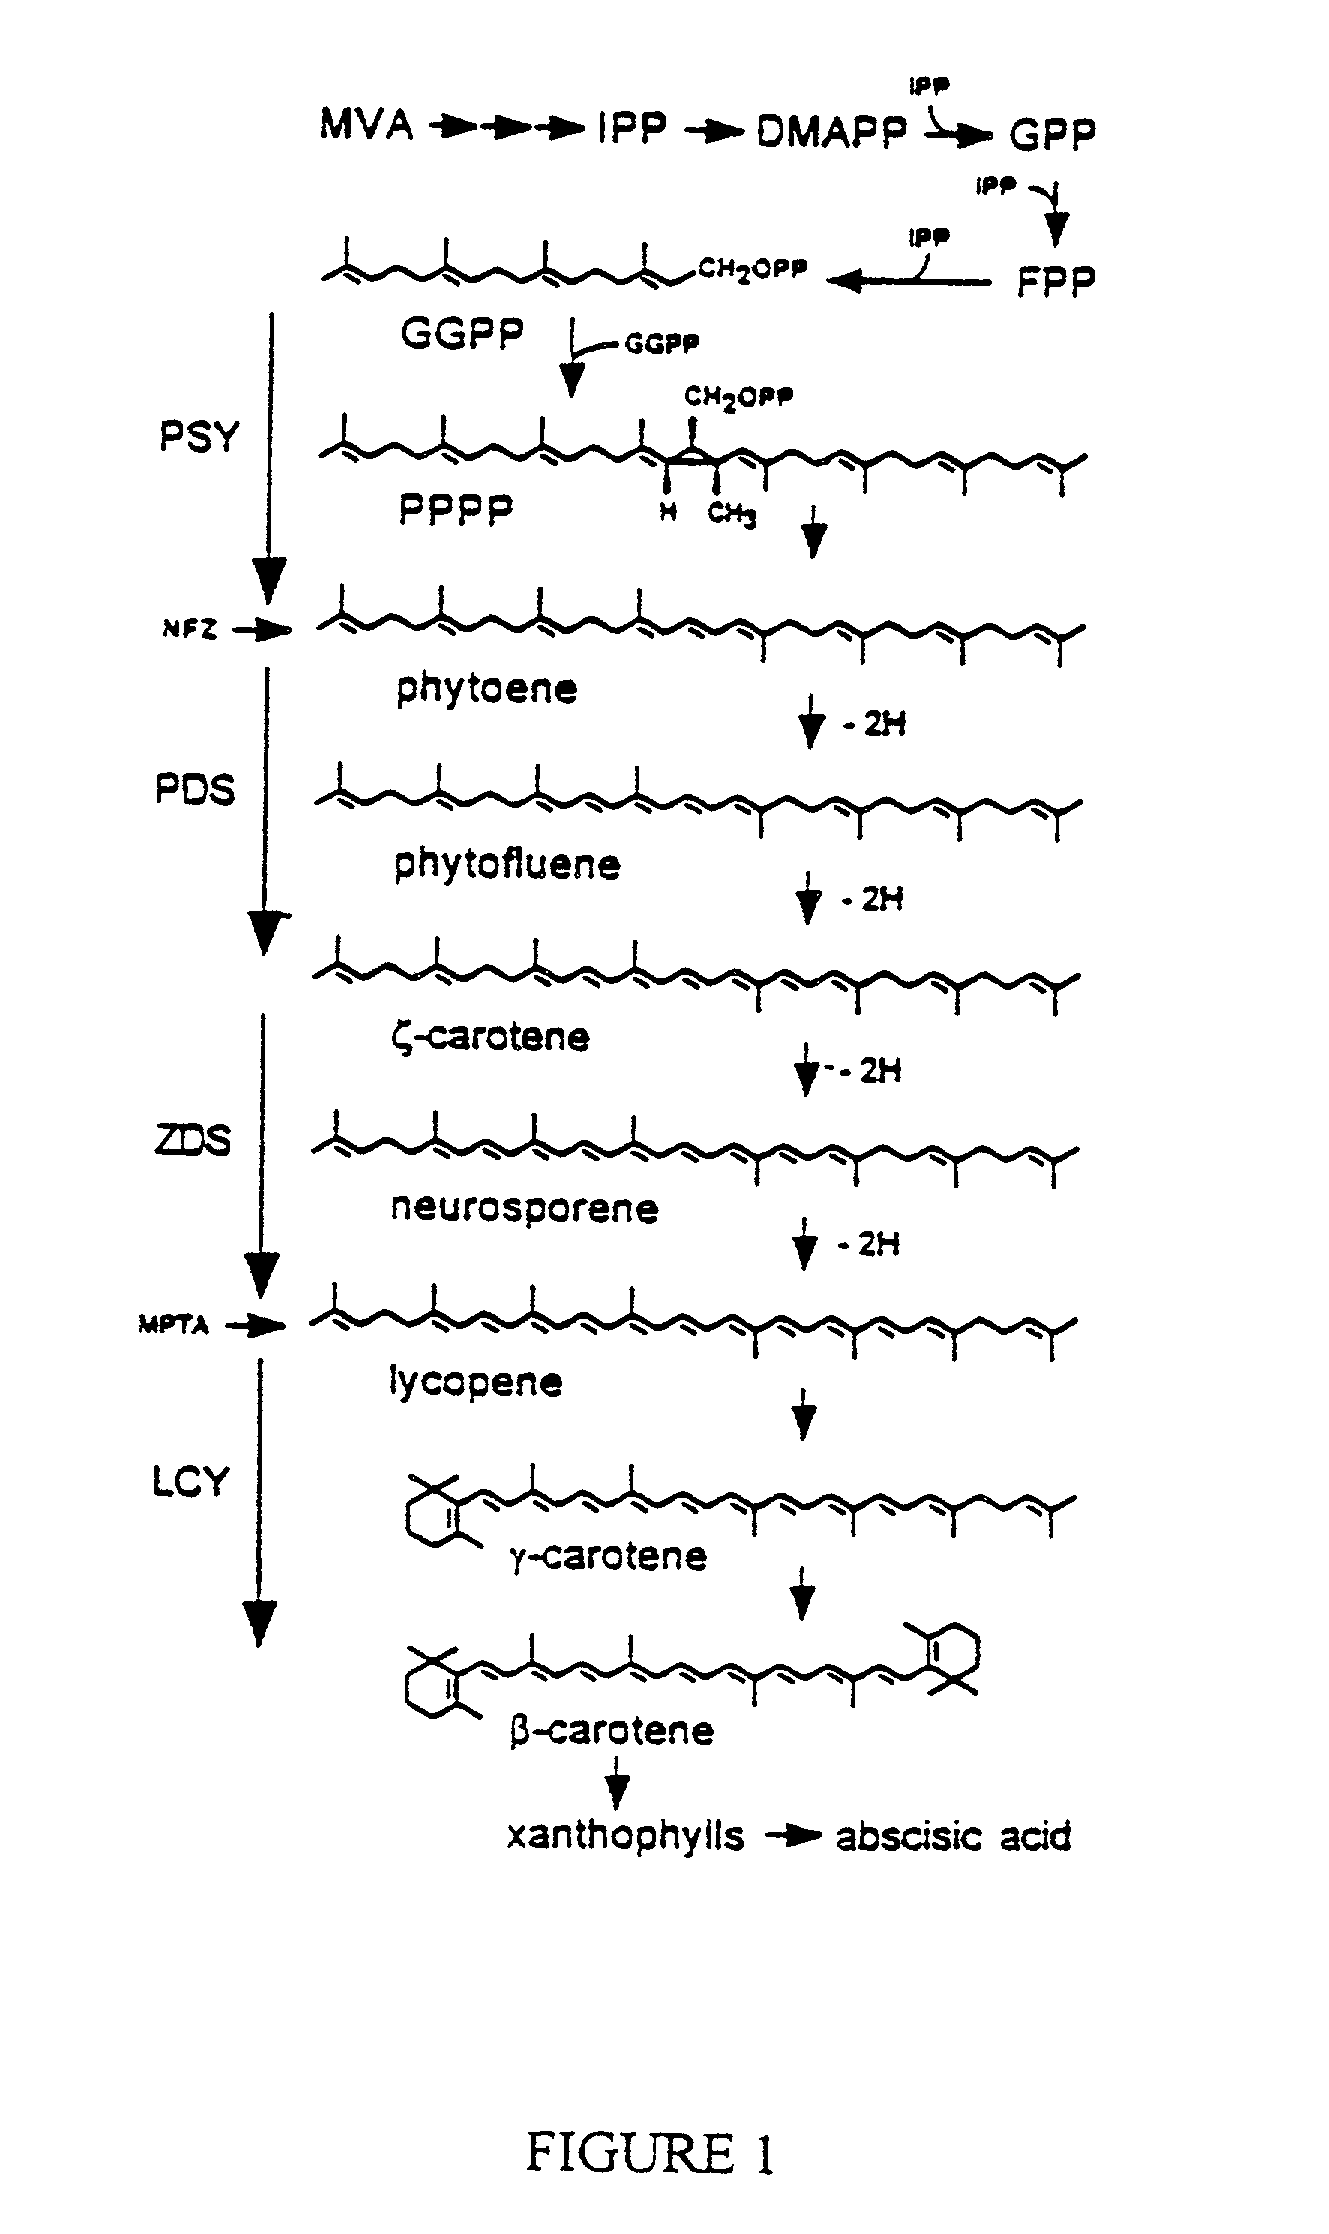 Genes of carotenoid biosynthesis and metabolism and methods of use thereof